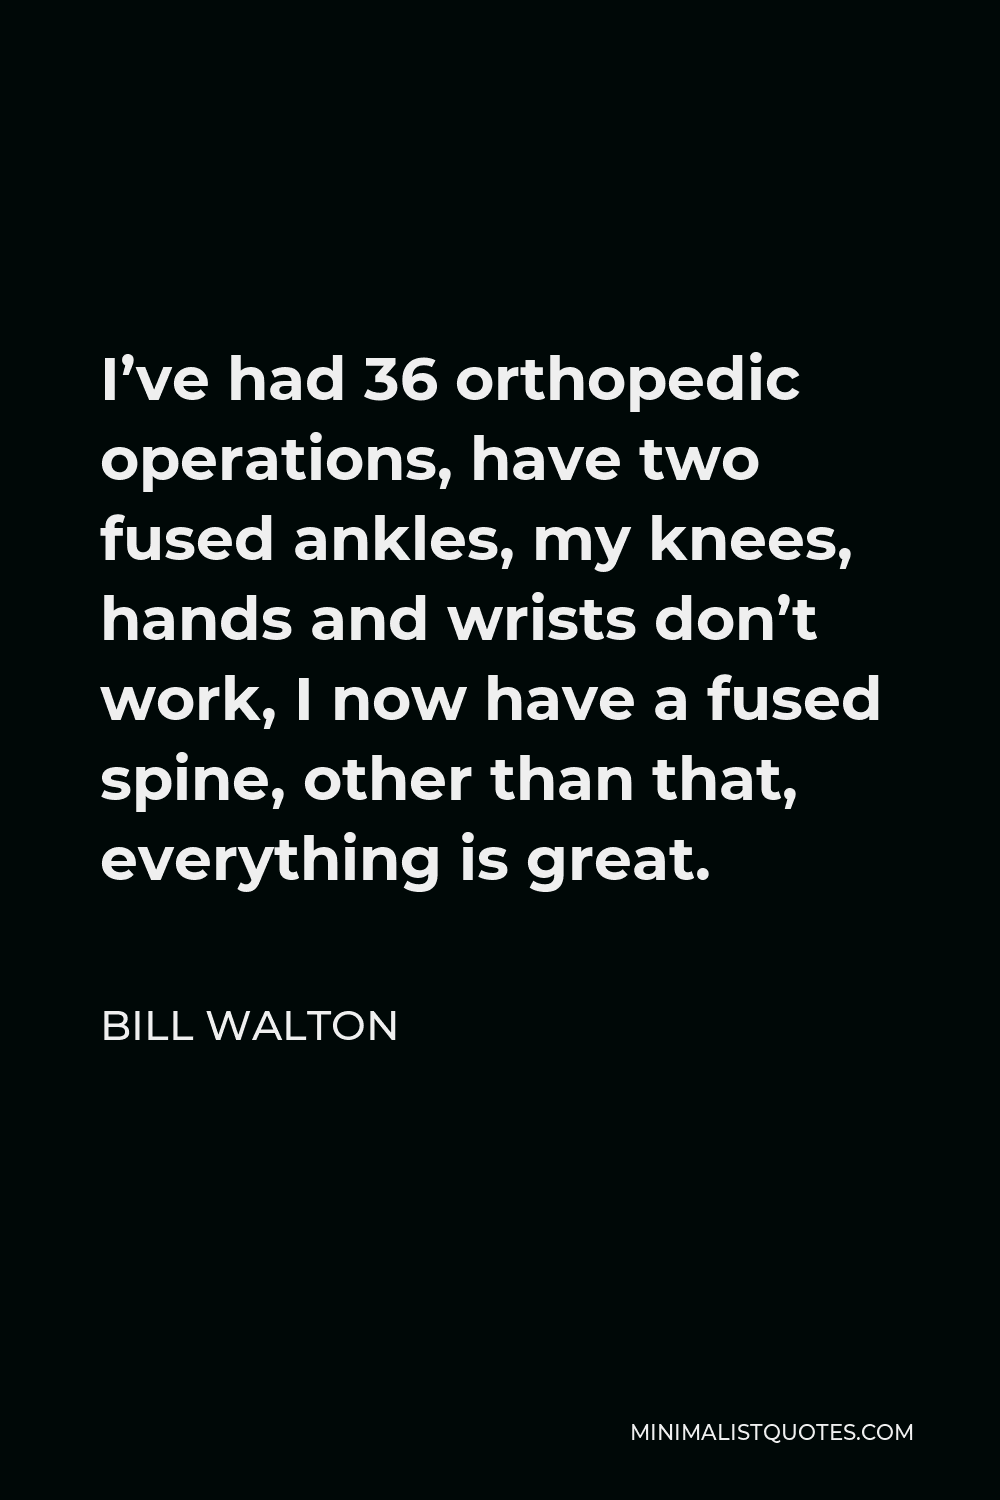 Bill Walton Quote - I’ve had 36 orthopedic operations, have two fused ankles, my knees, hands and wrists don’t work, I now have a fused spine, other than that, everything is great.